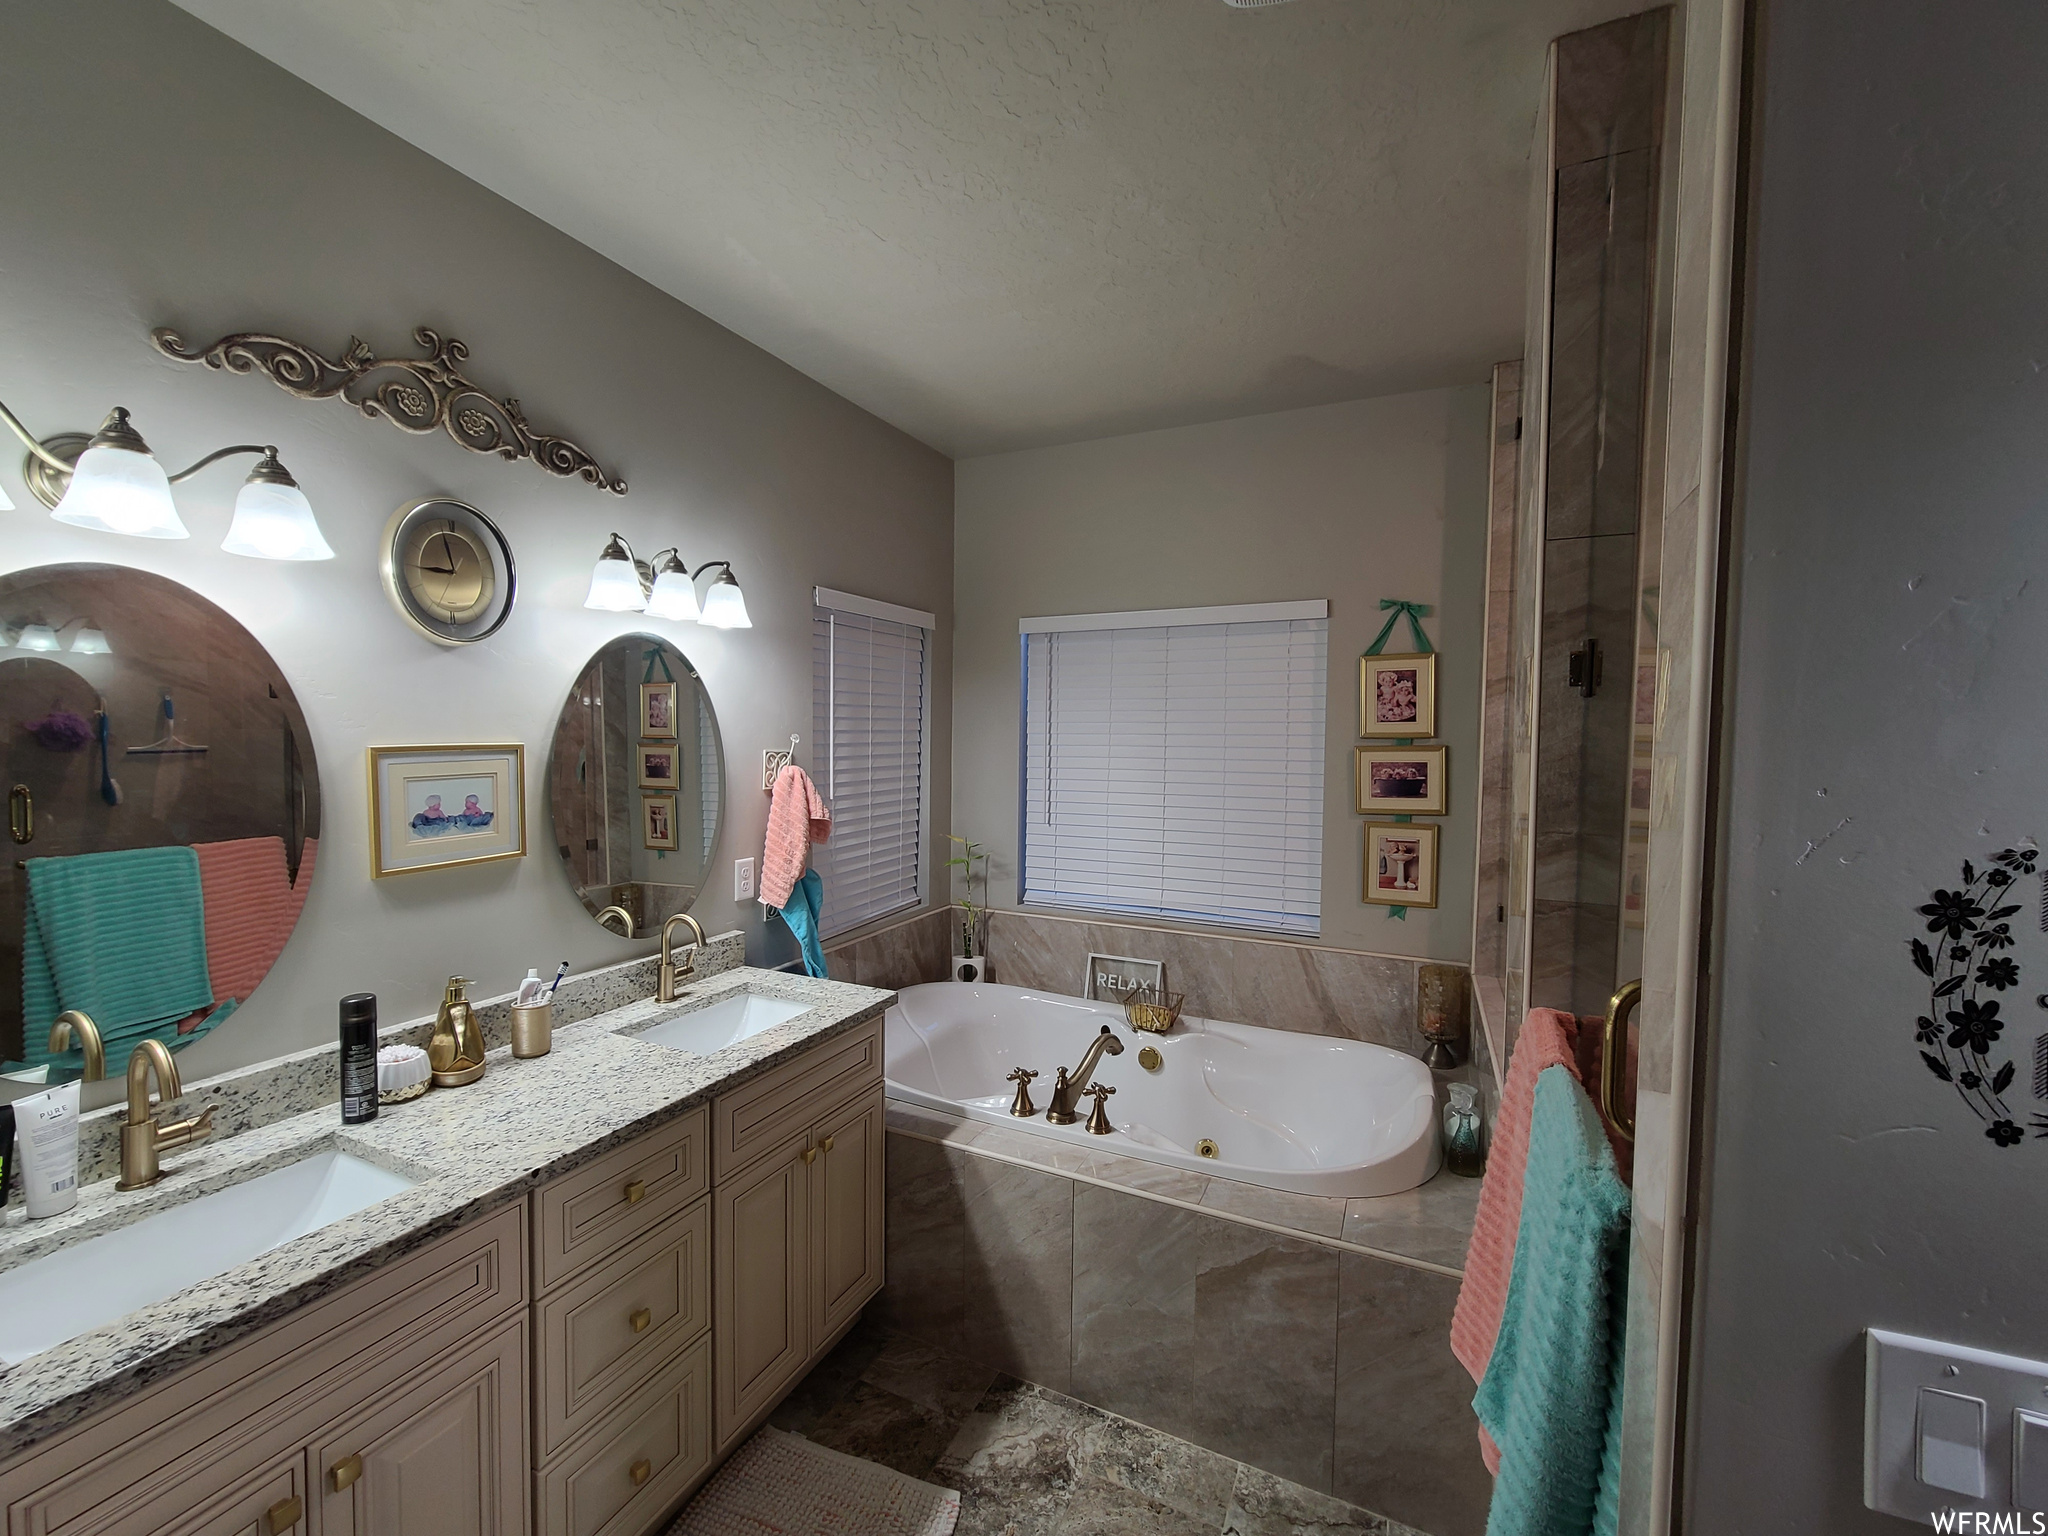 EXAMPLE ONLY - Bathroom featuring dual sinks, independent shower and bath, and vanity with extensive cabinet space